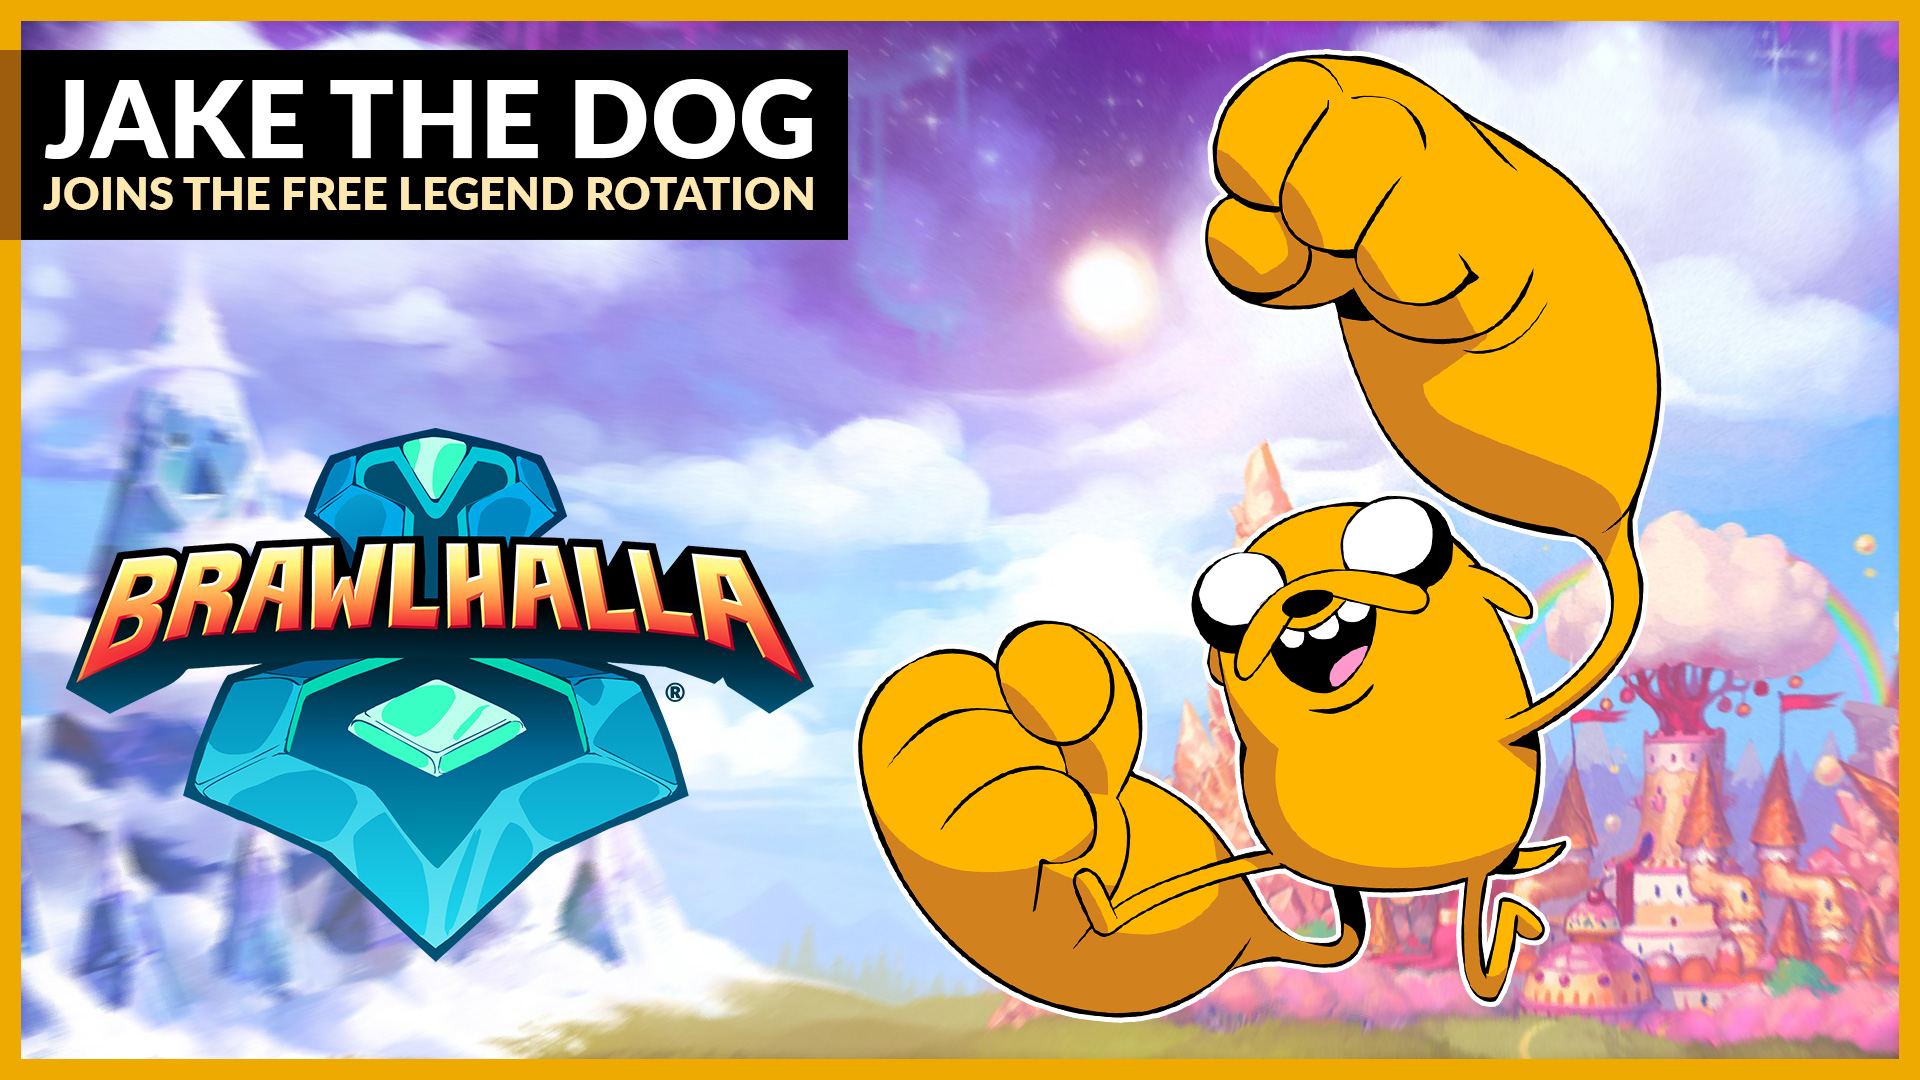 Jake the Dog joins Free-to-Play Legend Rotation!